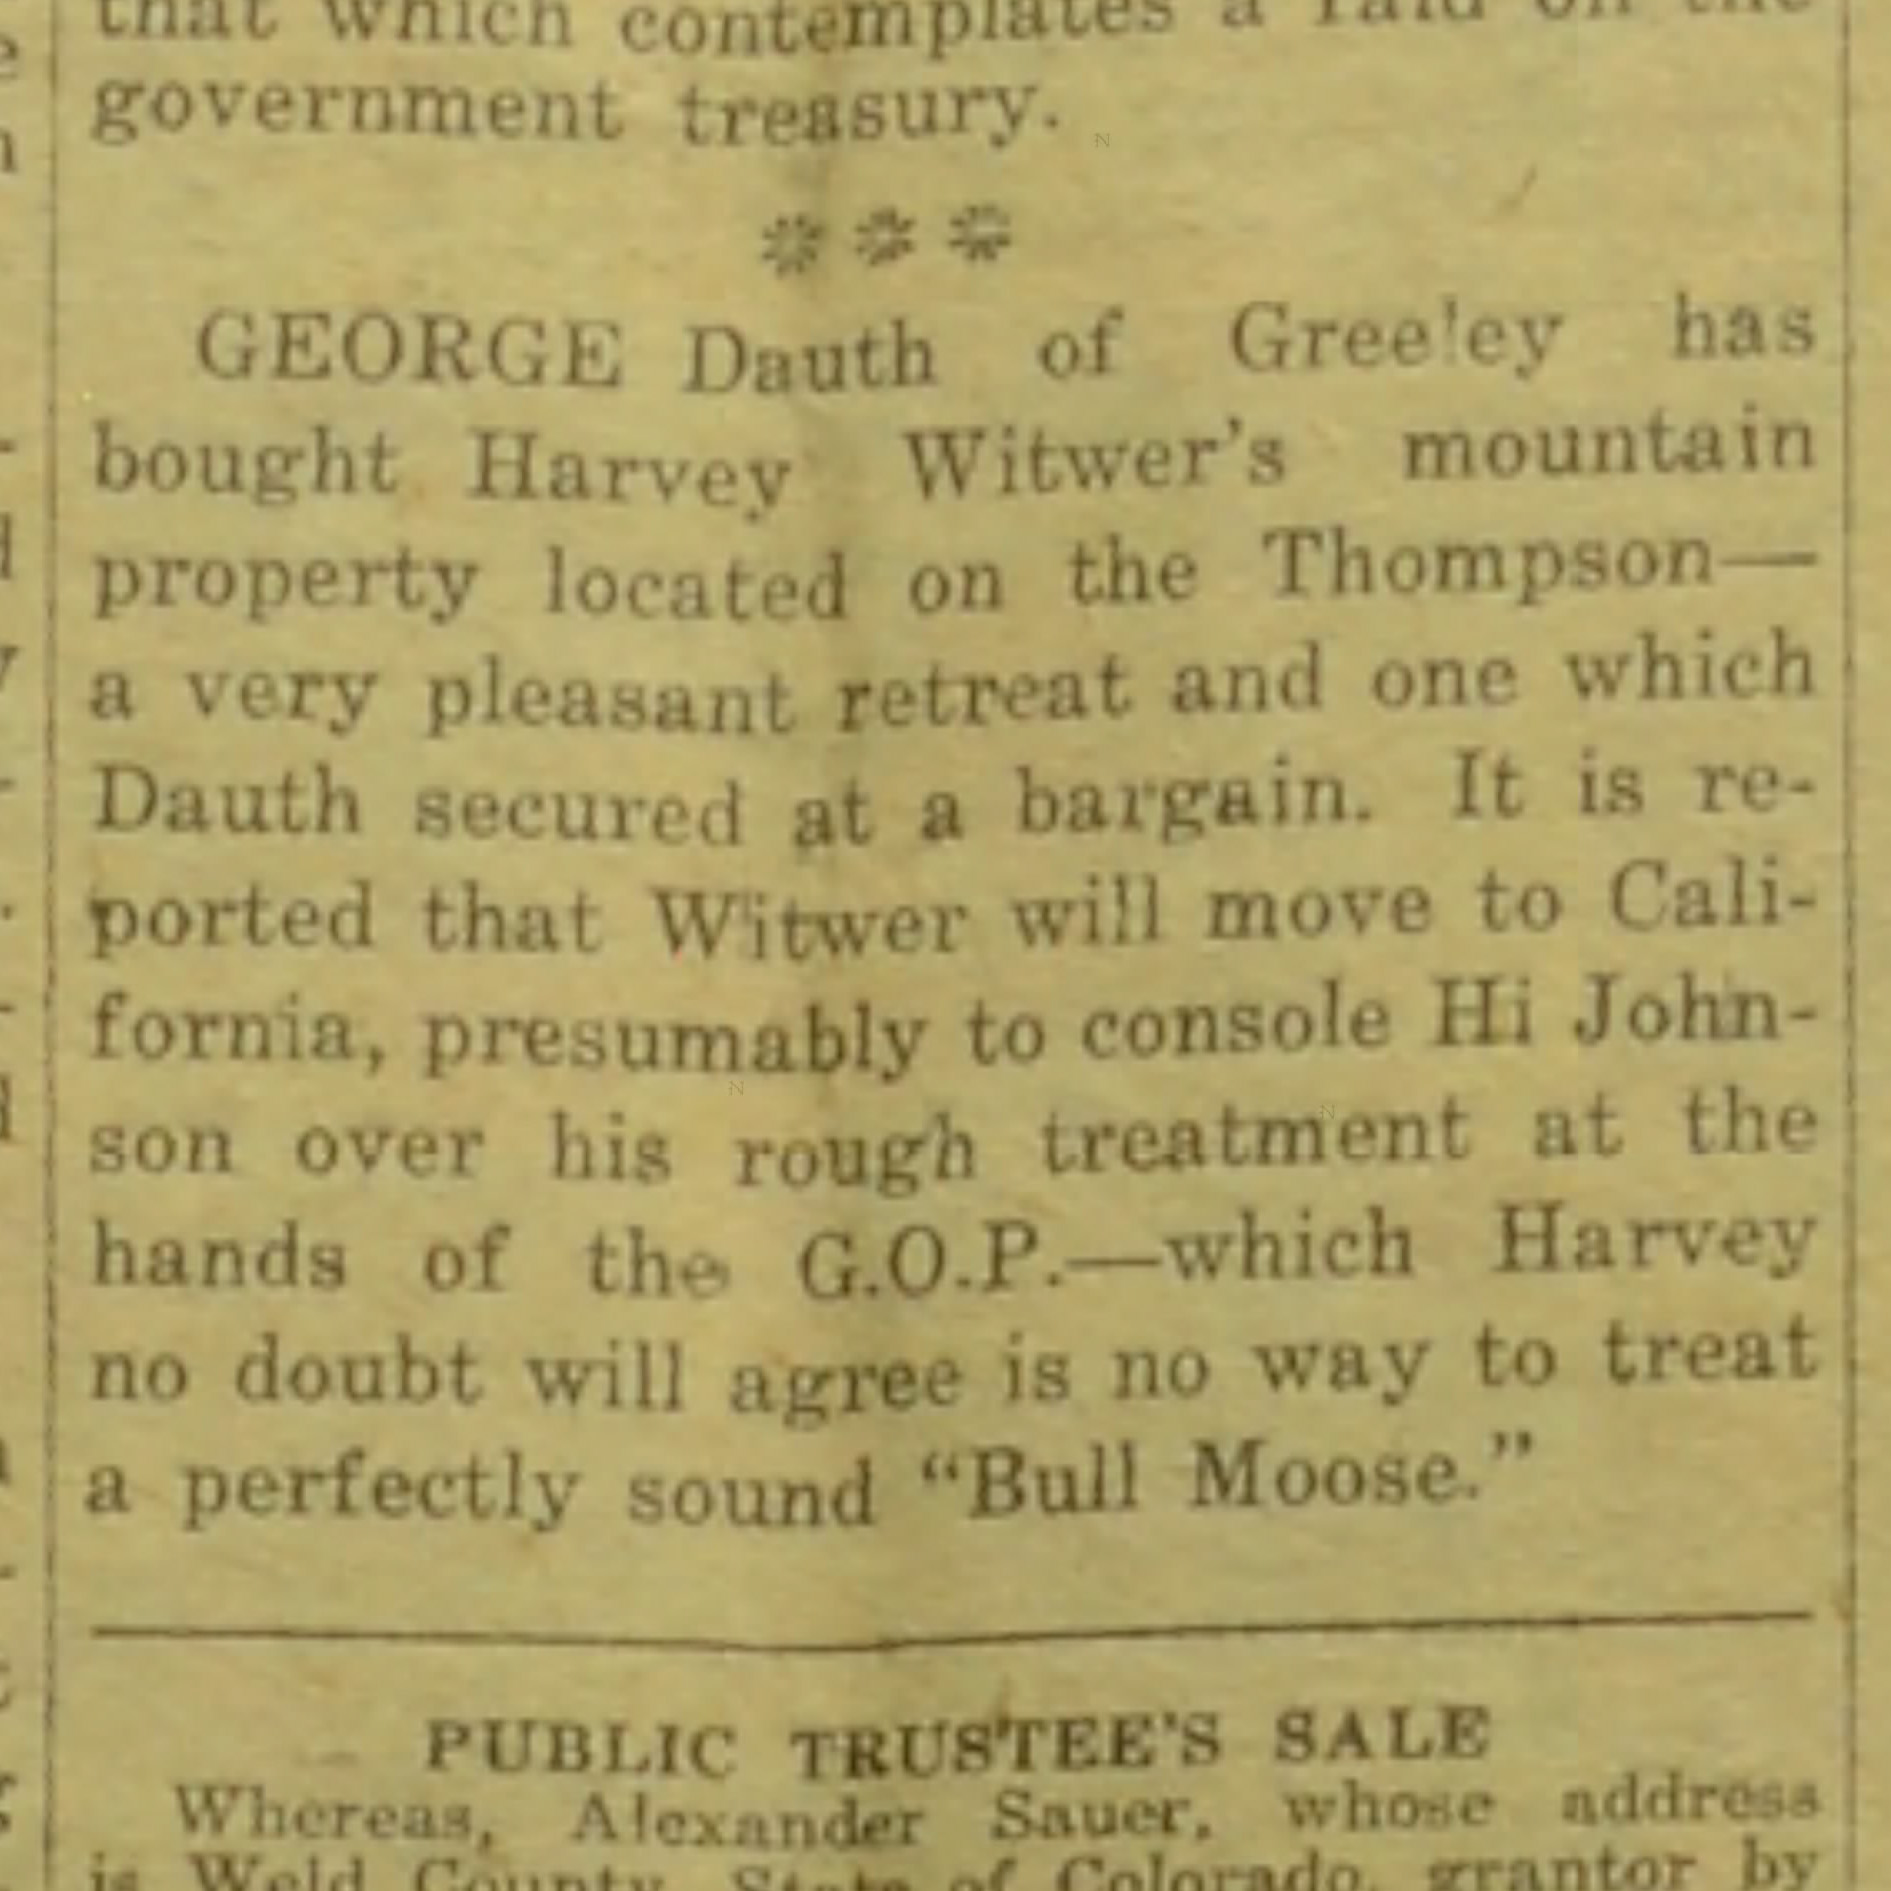 Dauth Family Archive - 1920-06-17 - Windsor Beacon - George Dauth Buys Idlewild